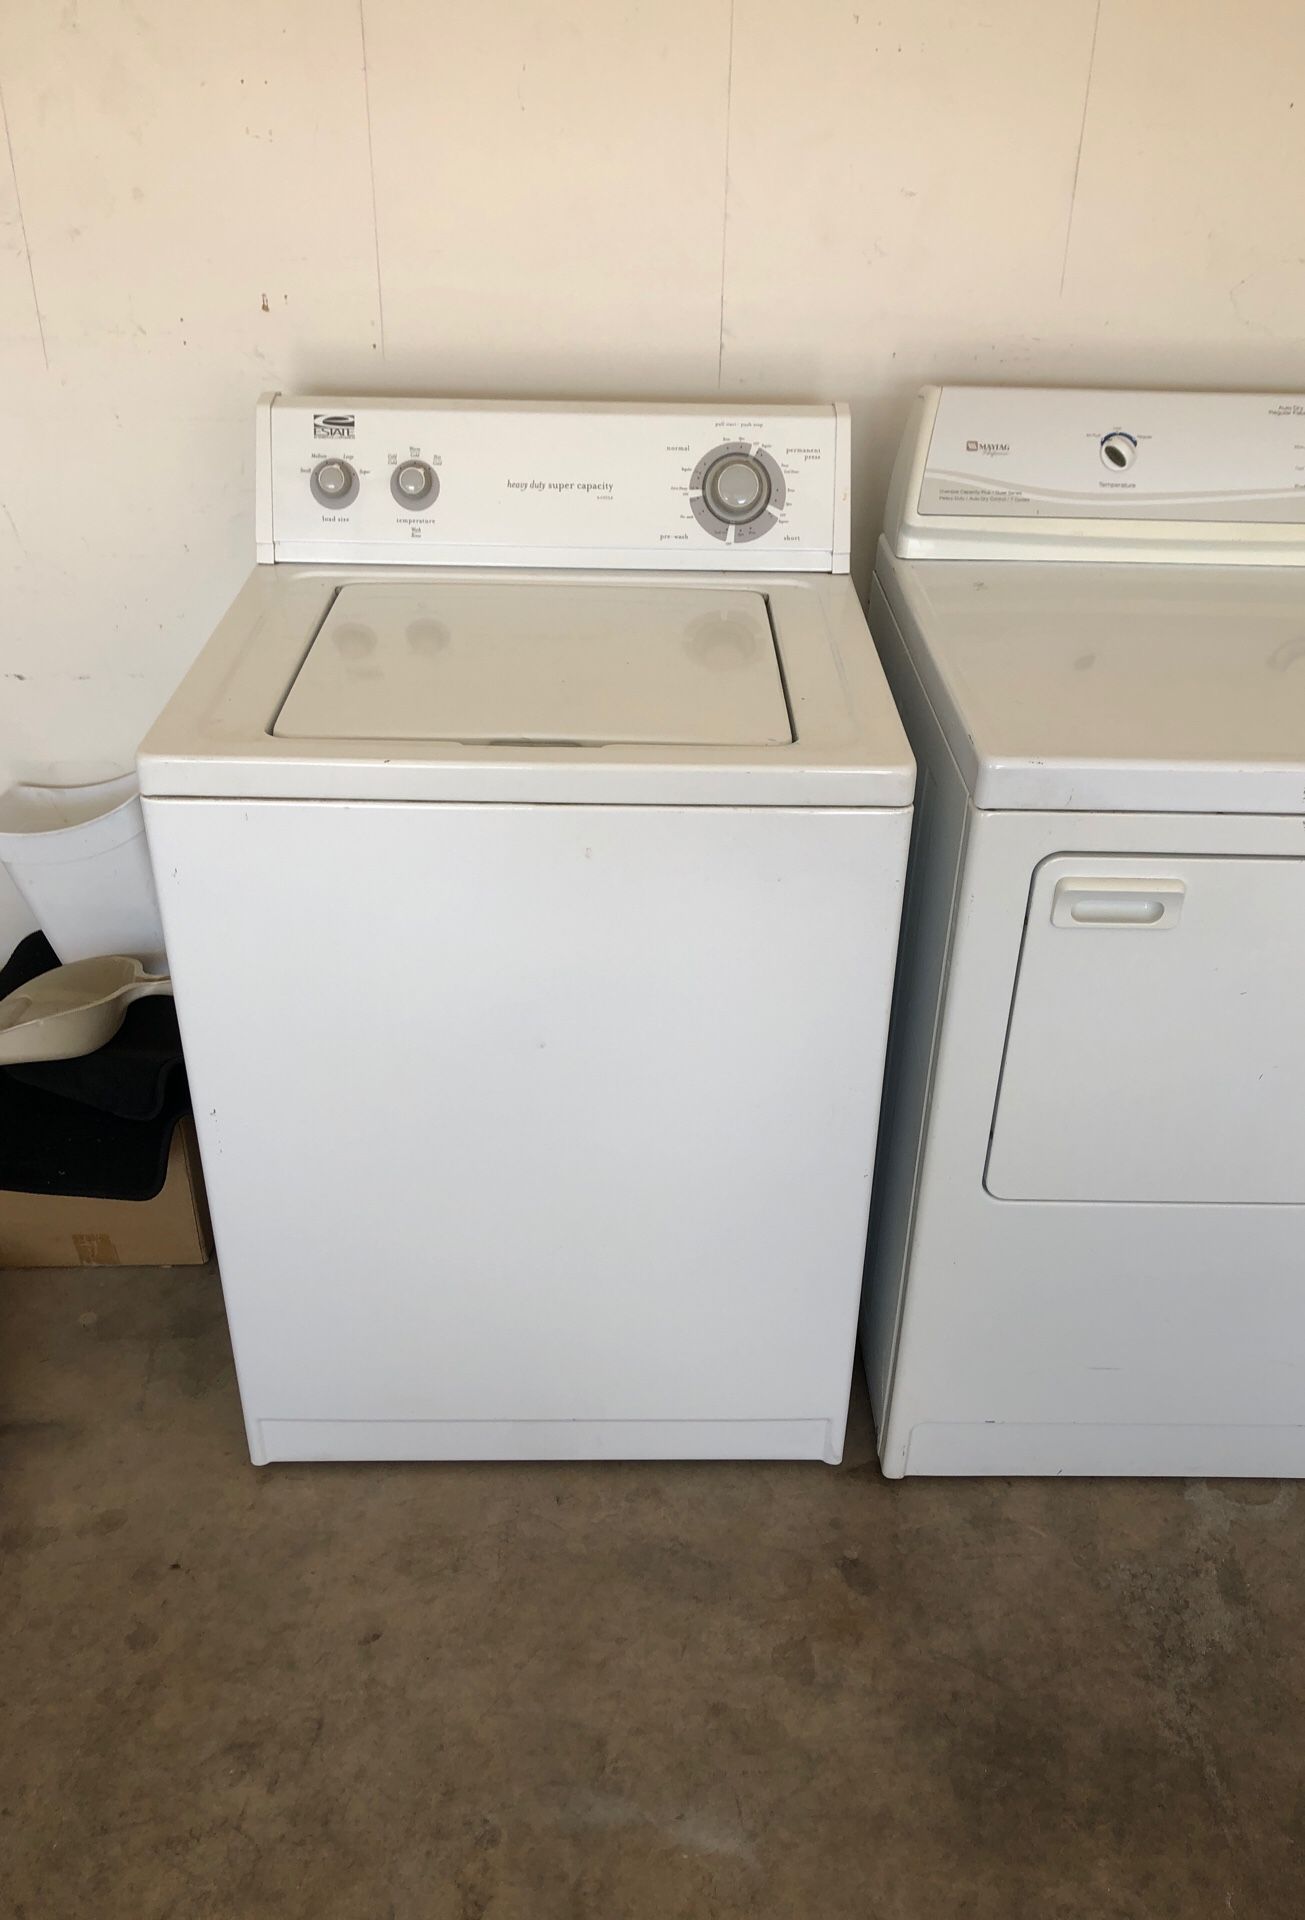 Heavy duty super capacity estate washer Maytag over capacity plus dryer